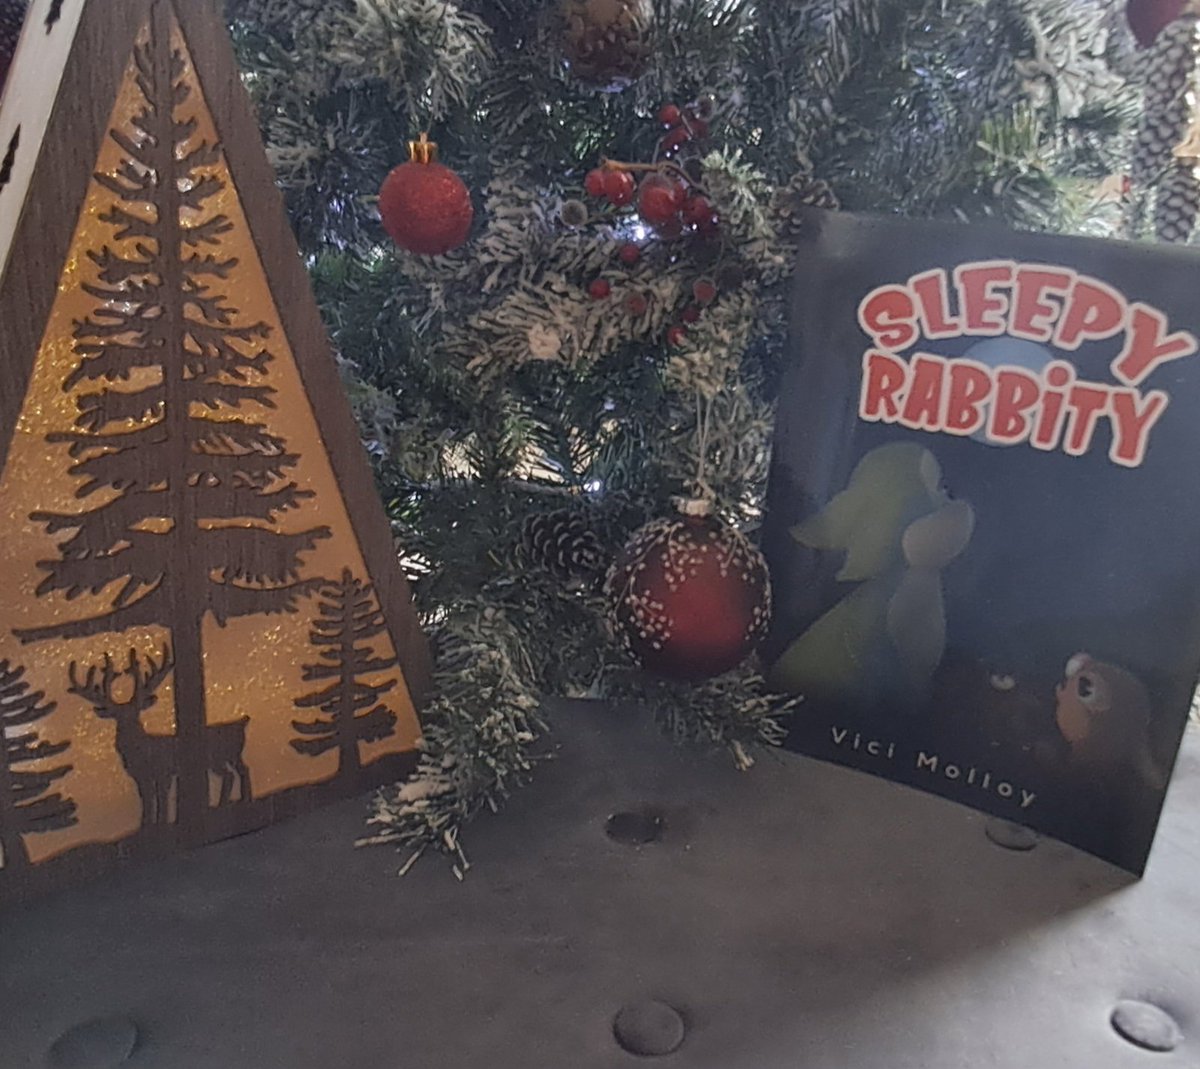 There's still time to get #sleepyrabbity as a #stockingfiller or #christmasevegift available anywhere online including @AustinMacauley @amazon @Waterstones @WHSmith @BNBuzz
#ChristmasGiftIdeas 
#childrensbooks
#picturebooks 
#bedtimestories
#givethegiftofreading 
#christmasevebox